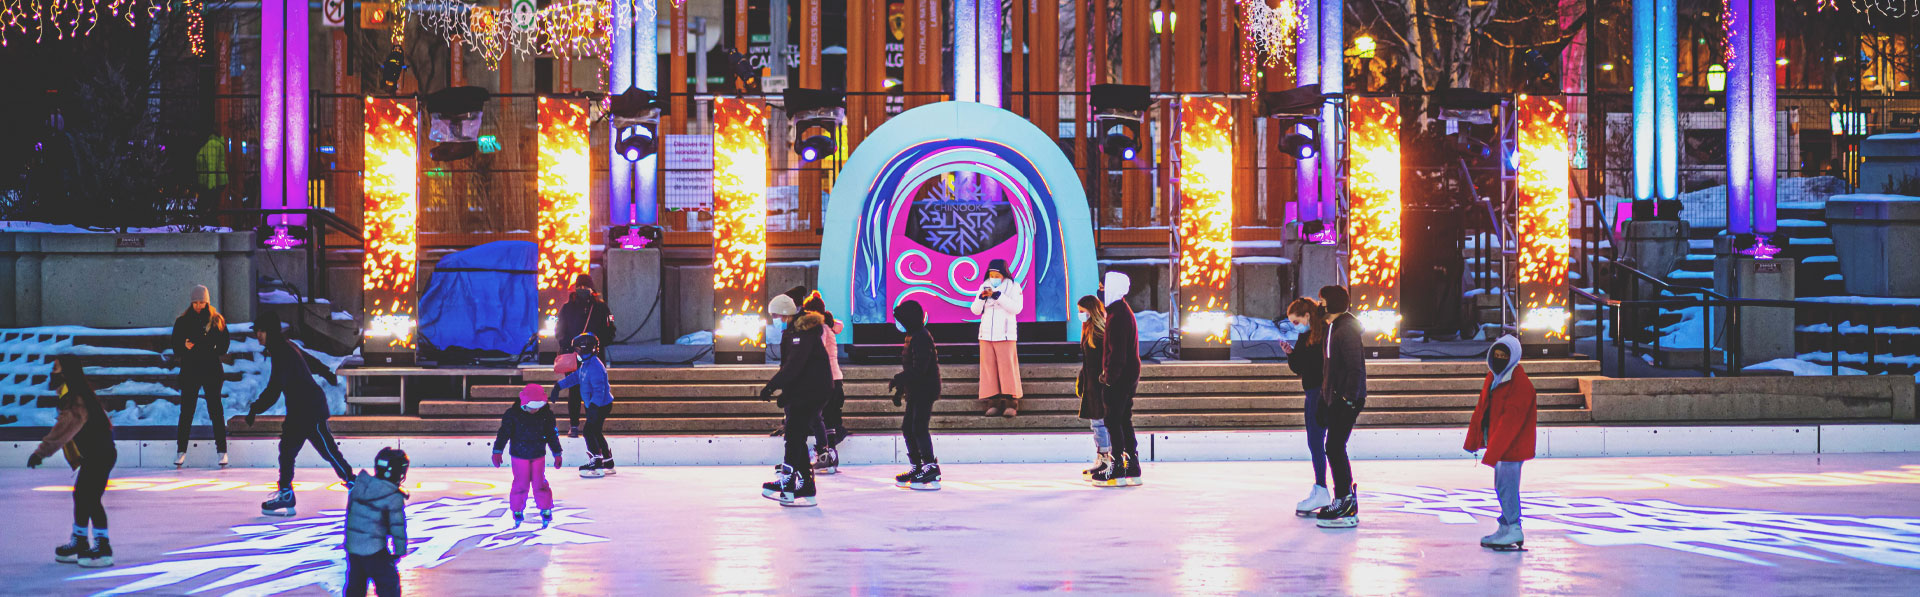 skating in Olympic Plaza during Chinook Blast